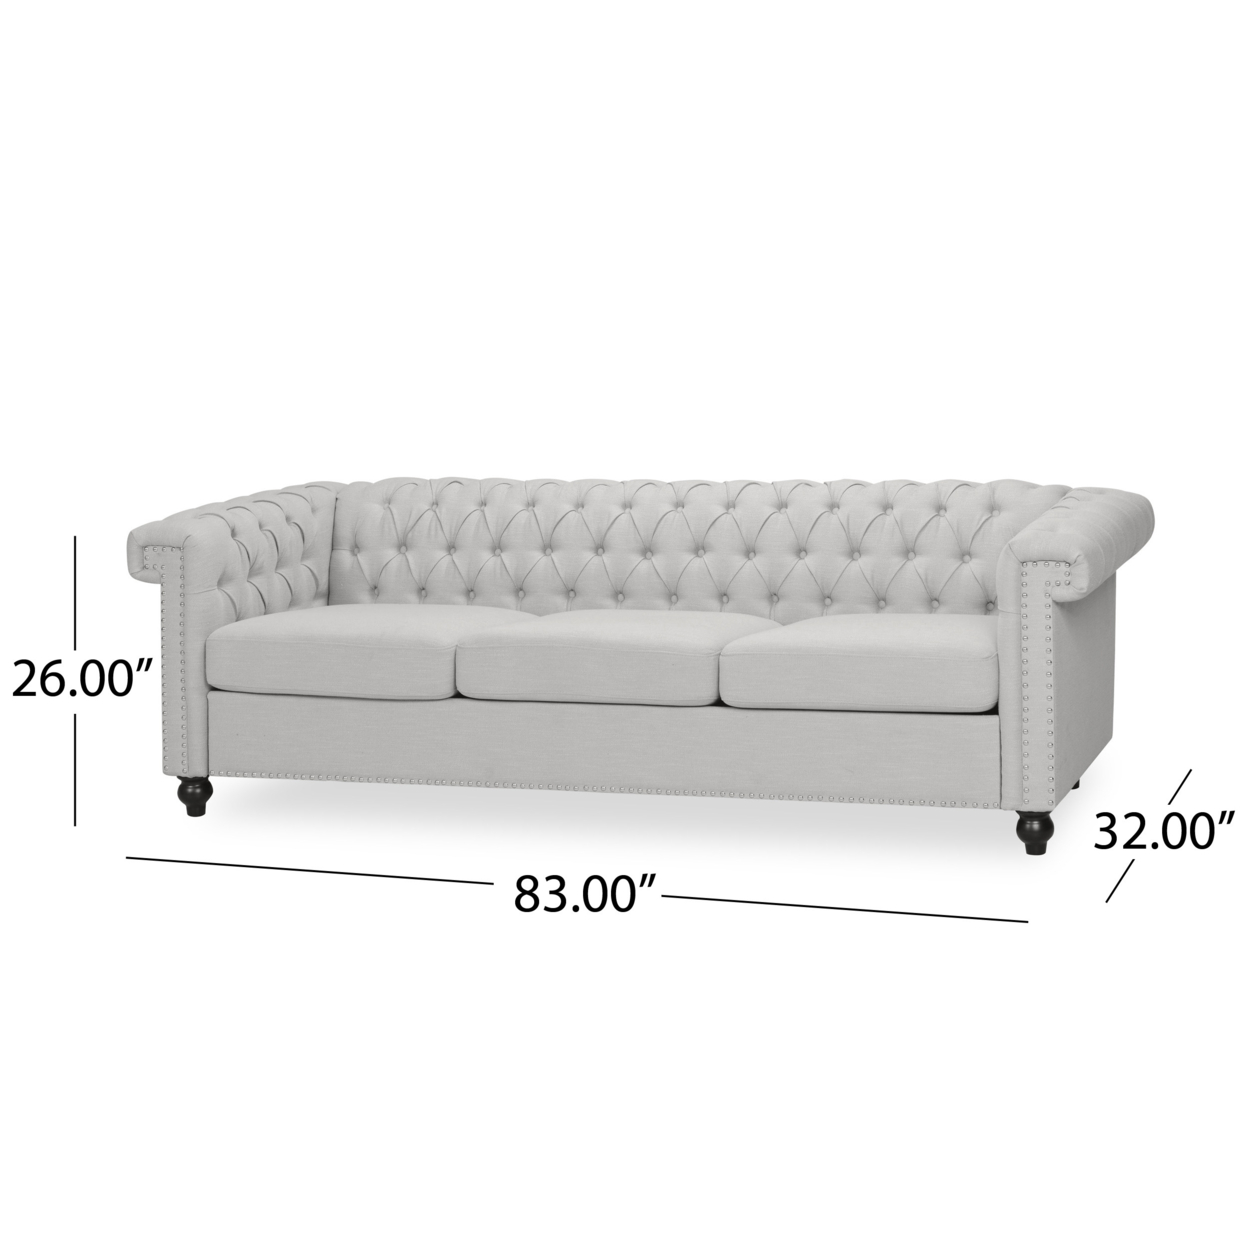 Zyiere Tufted Fabric Chesterfield 3 Seater Sofa